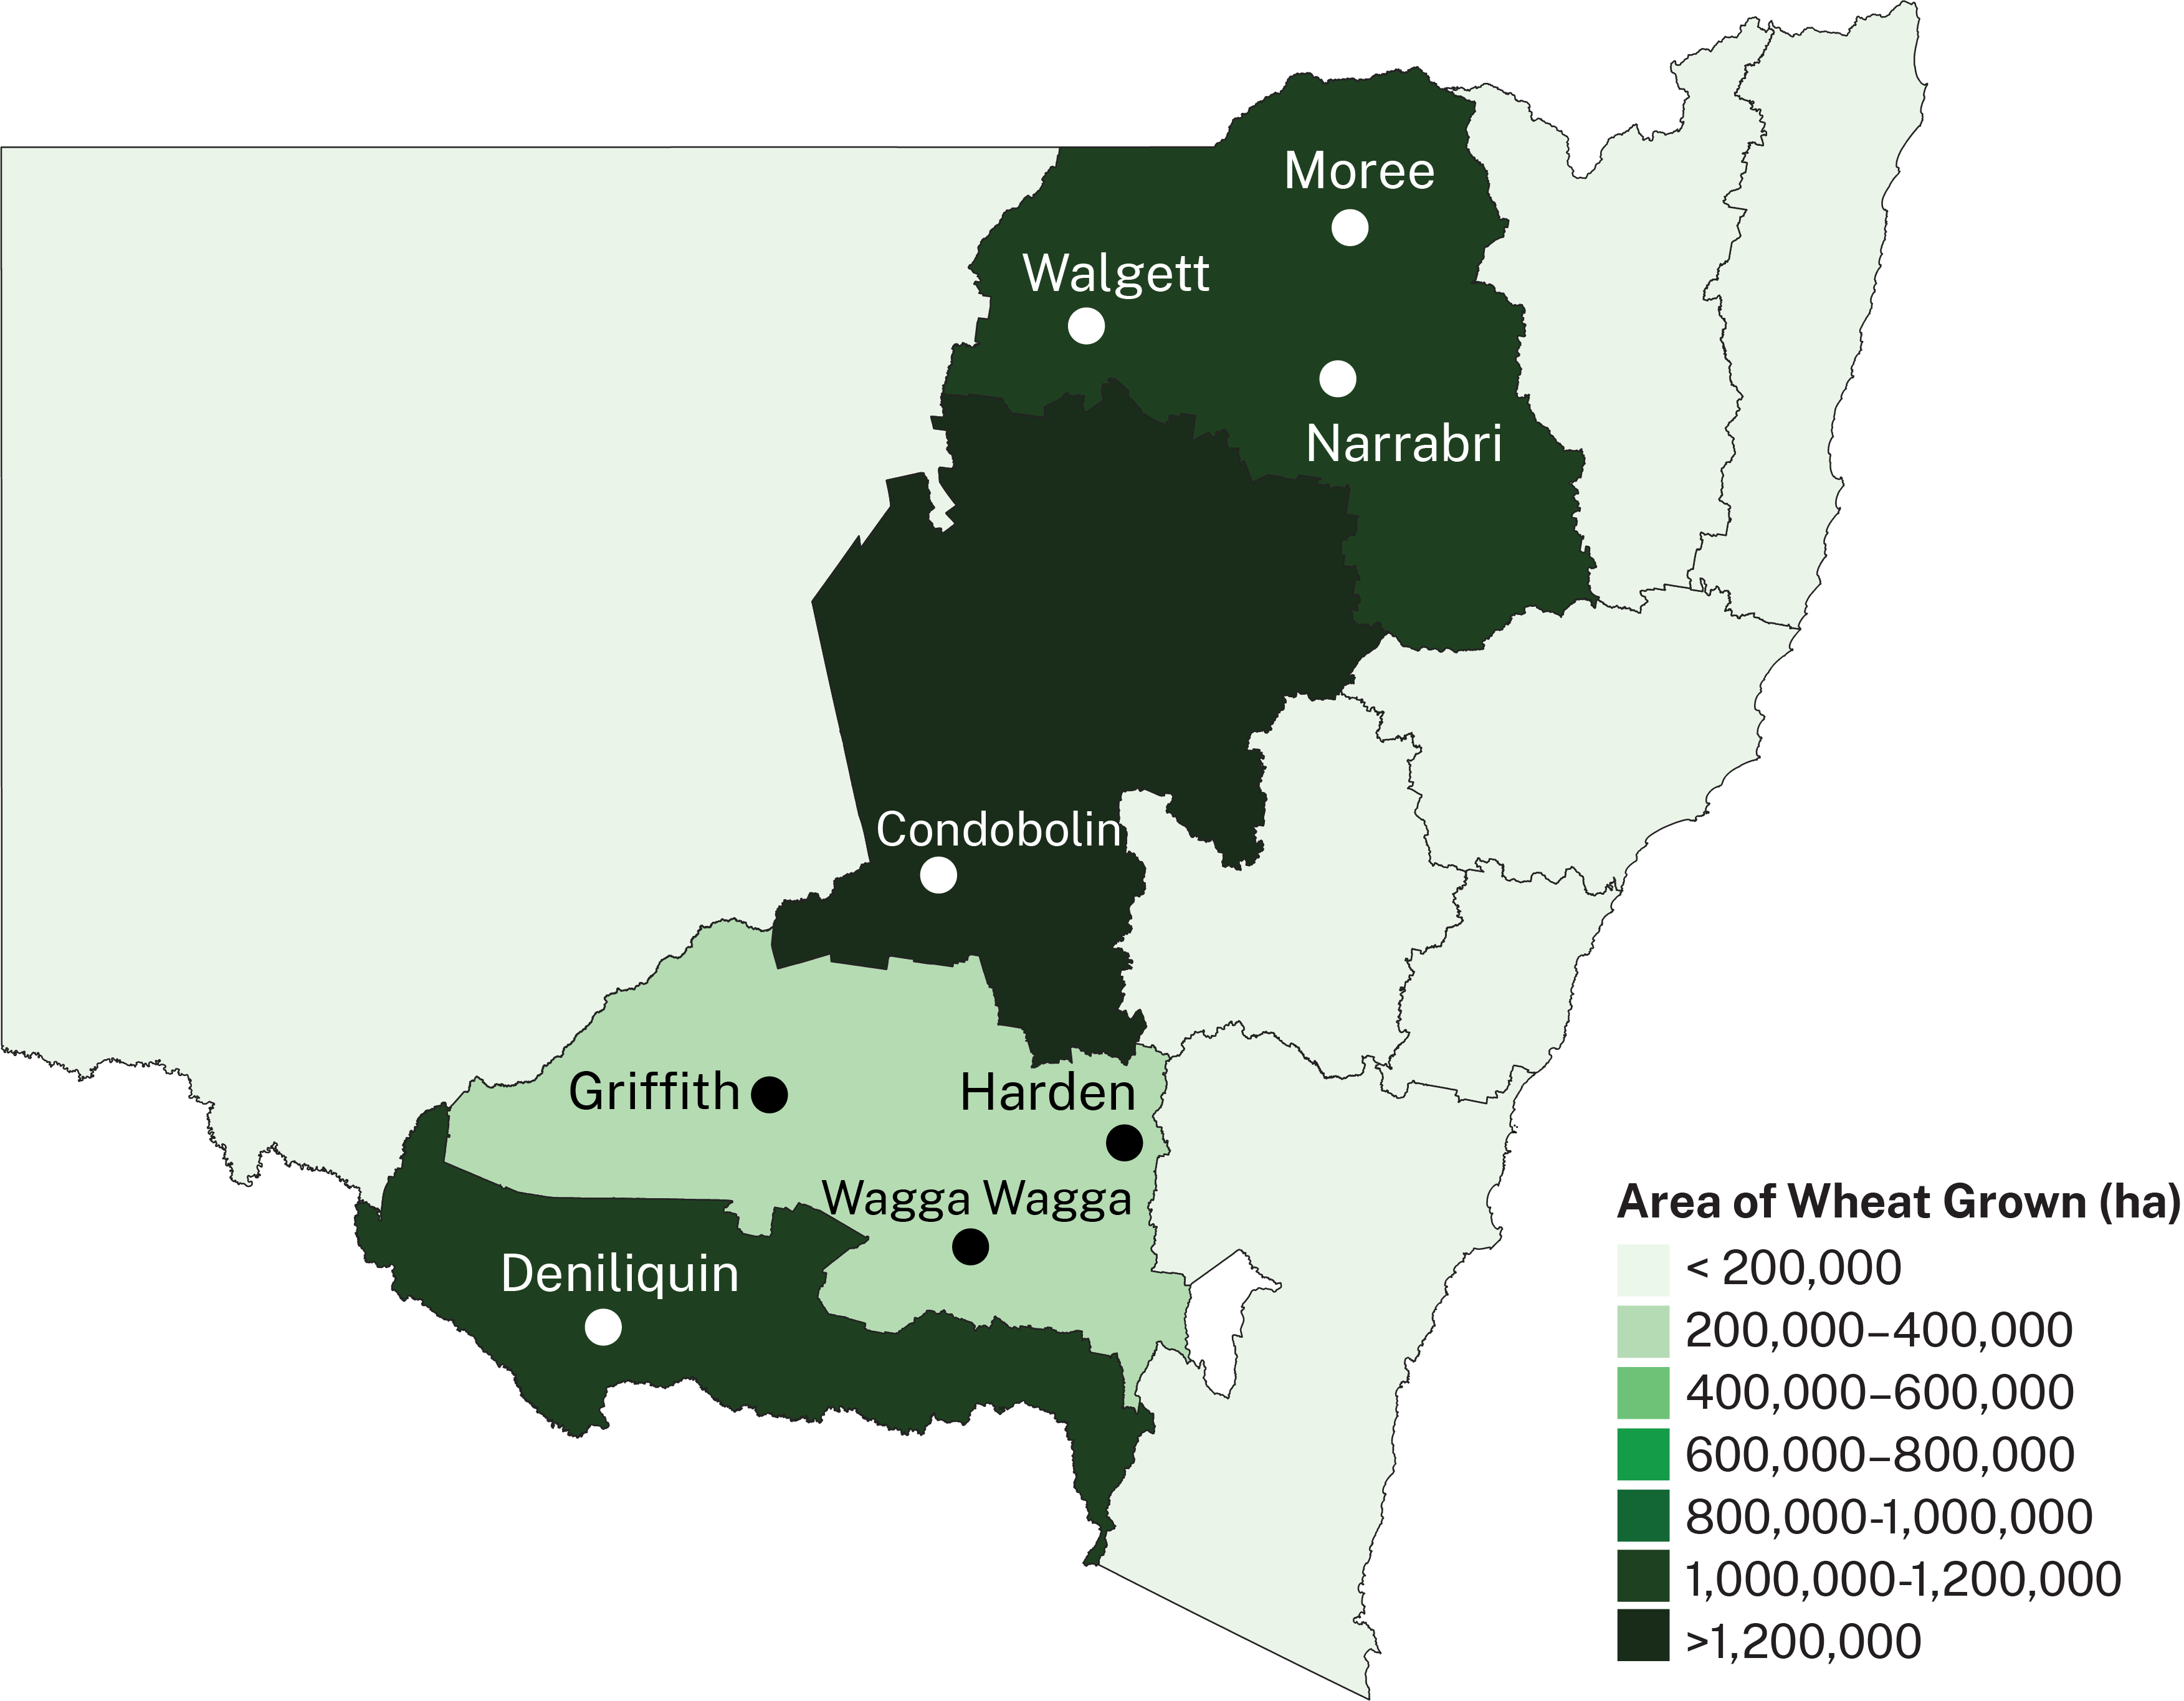 Wheat in NSW is grown in a belt west of the Great Dividing Range, stretching from Victoria to Queensland.